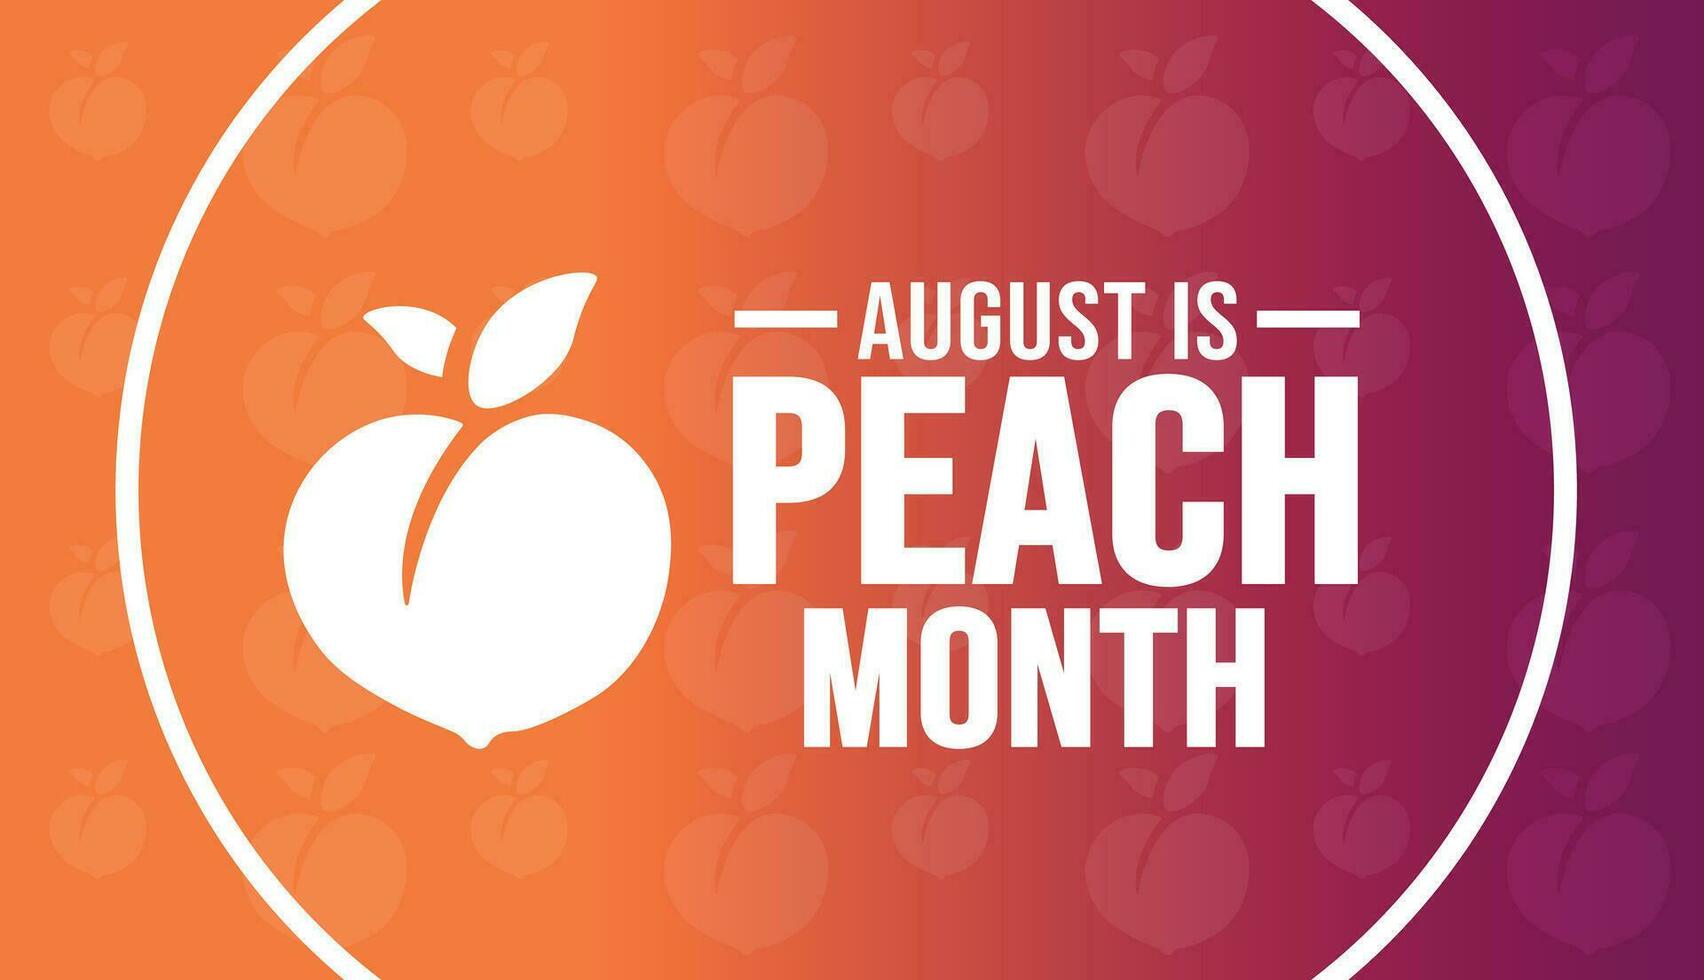 August is Peach Month background template. Holiday concept. background, banner, placard, card, and poster design template with ribbon, text inscription and standard color. vector illustration.